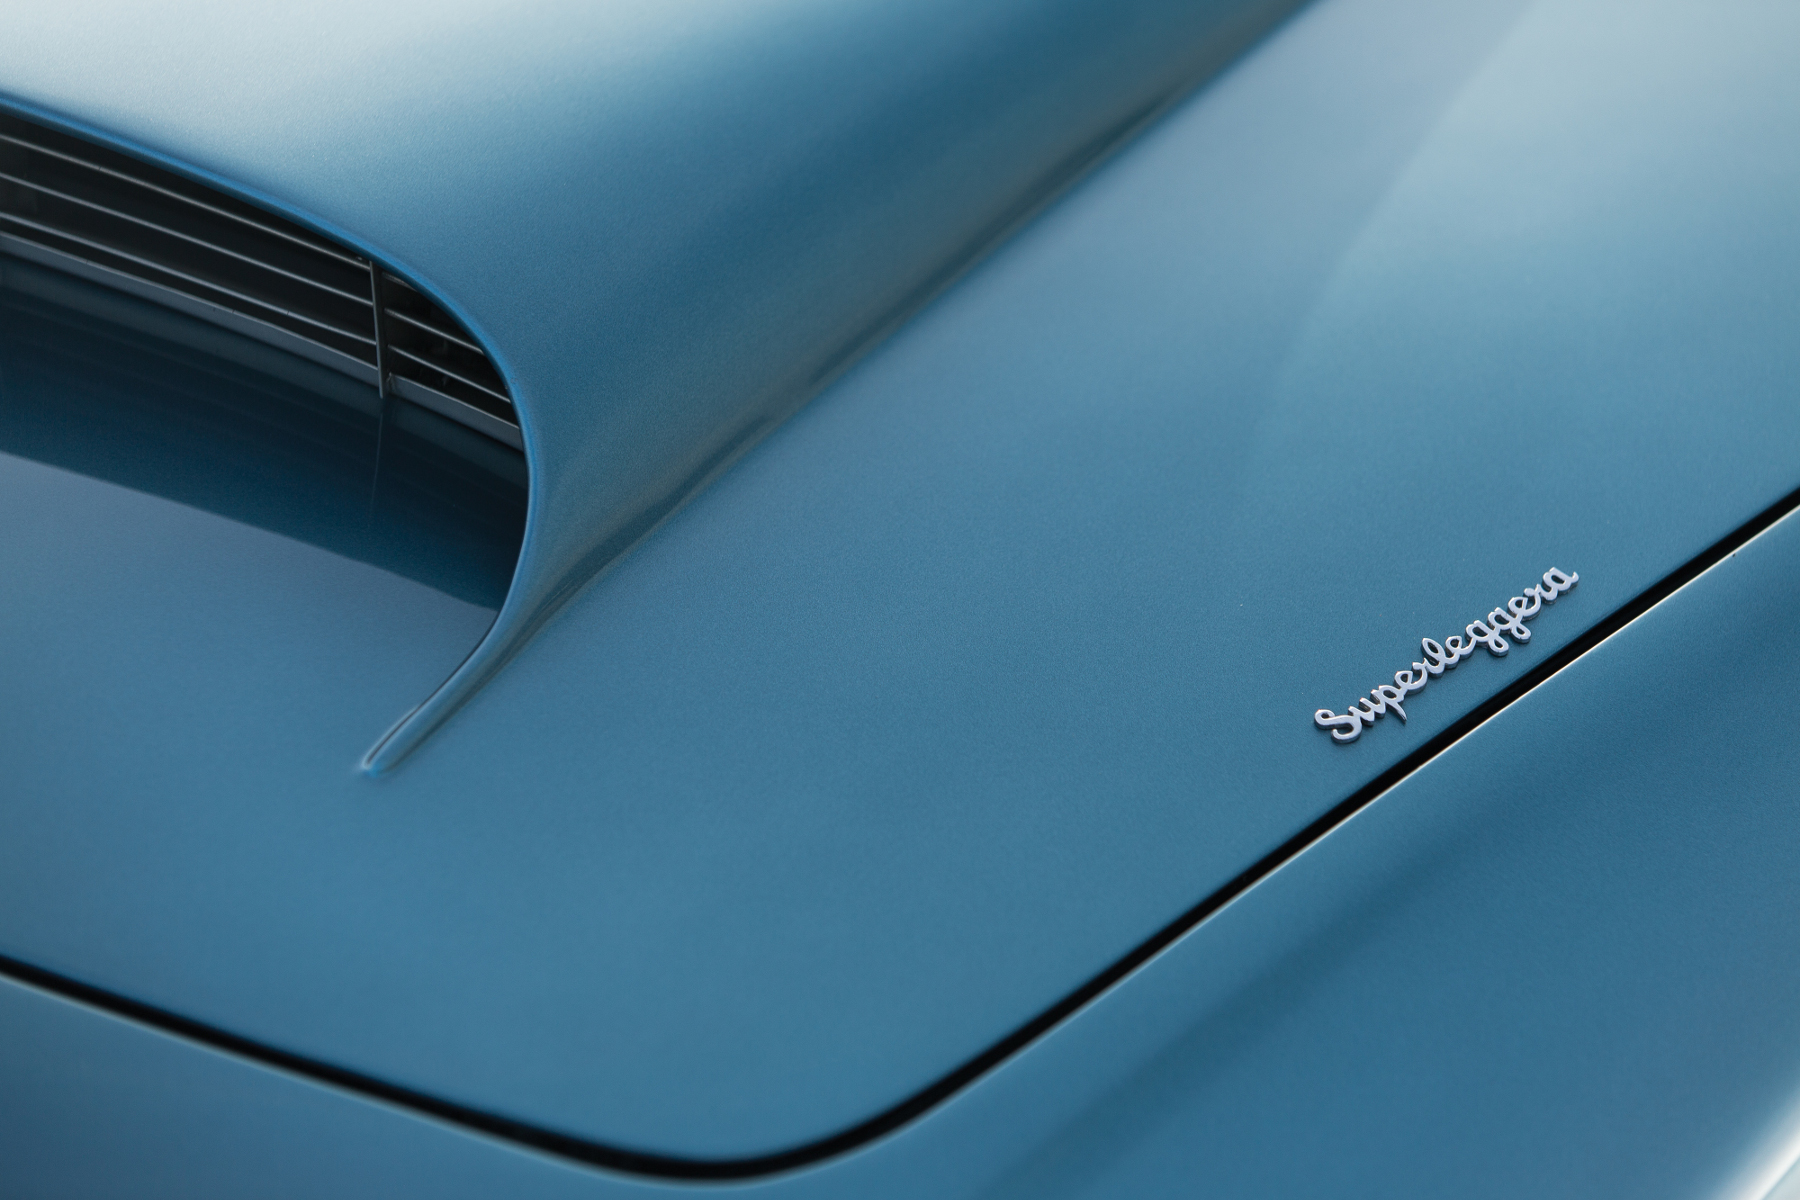 Bodywork of the DB4 was designed by Superleggera of Italy but made in Britain.